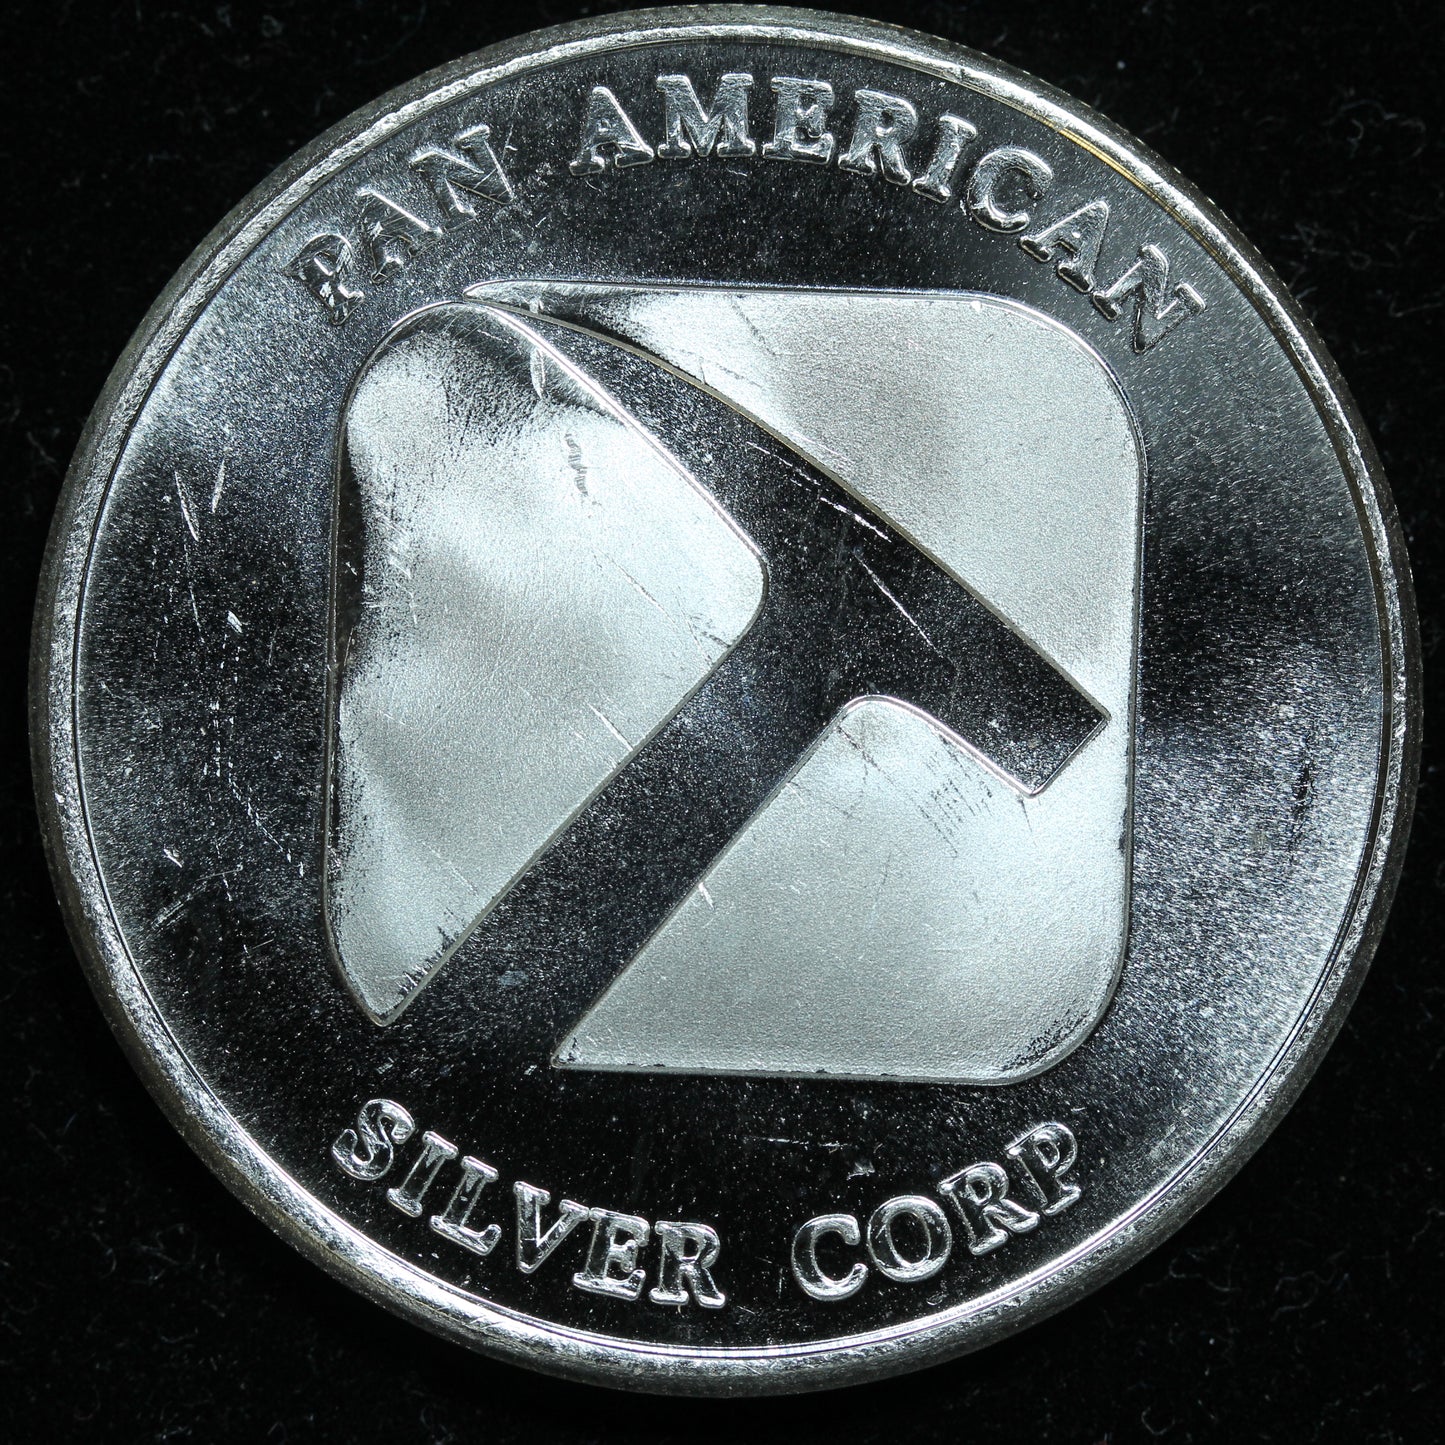 Northwest Territorial Mint 1 oz .999 Silver Round - Pan American Silver Corp